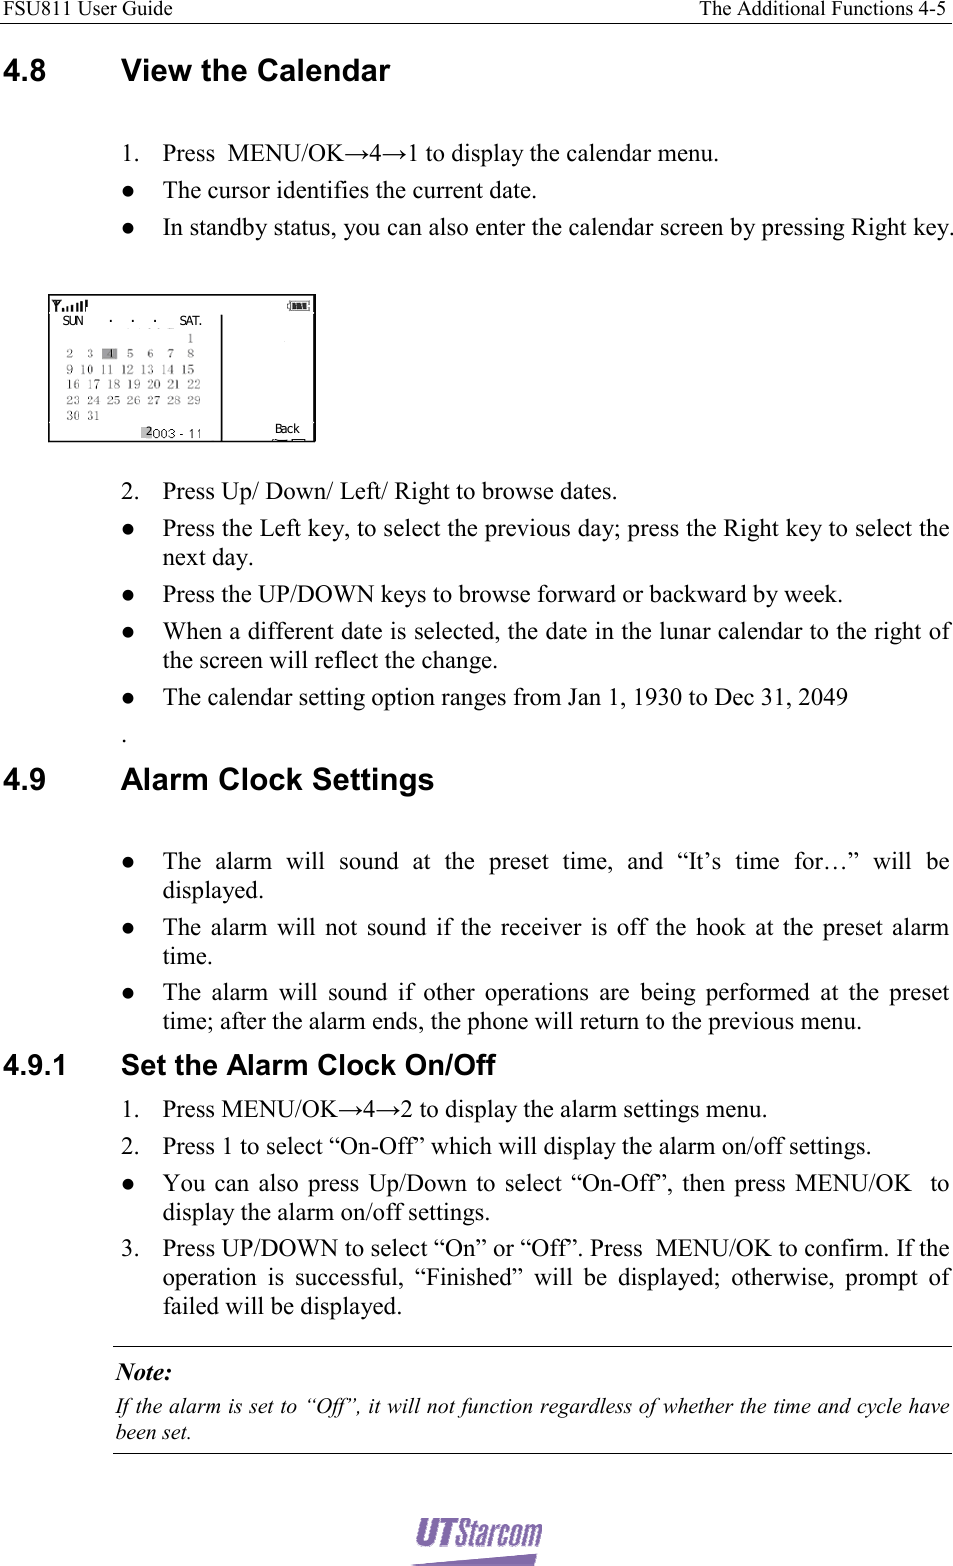 FSU811 User Guide                                                                                                     The Additional Functions 4-5  4.8 View the Calendar  1. Press  MENU/OK→4→1 to display the calendar menu. z The cursor identifies the current date.  z In standby status, you can also enter the calendar screen by pressing Right key.  SUN .  .  . SAT.Bac k2 2. Press Up/ Down/ Left/ Right to browse dates. z Press the Left key, to select the previous day; press the Right key to select the next day. z Press the UP/DOWN keys to browse forward or backward by week. z When a different date is selected, the date in the lunar calendar to the right of the screen will reflect the change. z The calendar setting option ranges from Jan 1, 1930 to Dec 31, 2049 . 4.9  Alarm Clock Settings  z The alarm will sound at the preset time, and “It’s time for…” will be displayed. z The alarm will not sound if the receiver is off the hook at the preset alarm time. z The alarm will sound if other operations are being performed at the preset time; after the alarm ends, the phone will return to the previous menu. 4.9.1  Set the Alarm Clock On/Off 1. Press MENU/OK→4→2 to display the alarm settings menu. 2. Press 1 to select “On-Off” which will display the alarm on/off settings. z You can also press Up/Down to select “On-Off”, then press MENU/OK  to display the alarm on/off settings. 3. Press UP/DOWN to select “On” or “Off”. Press  MENU/OK to confirm. If the operation is successful, “Finished” will be displayed; otherwise, prompt of failed will be displayed. Note: If the alarm is set to “Off”, it will not function regardless of whether the time and cycle have been set. 